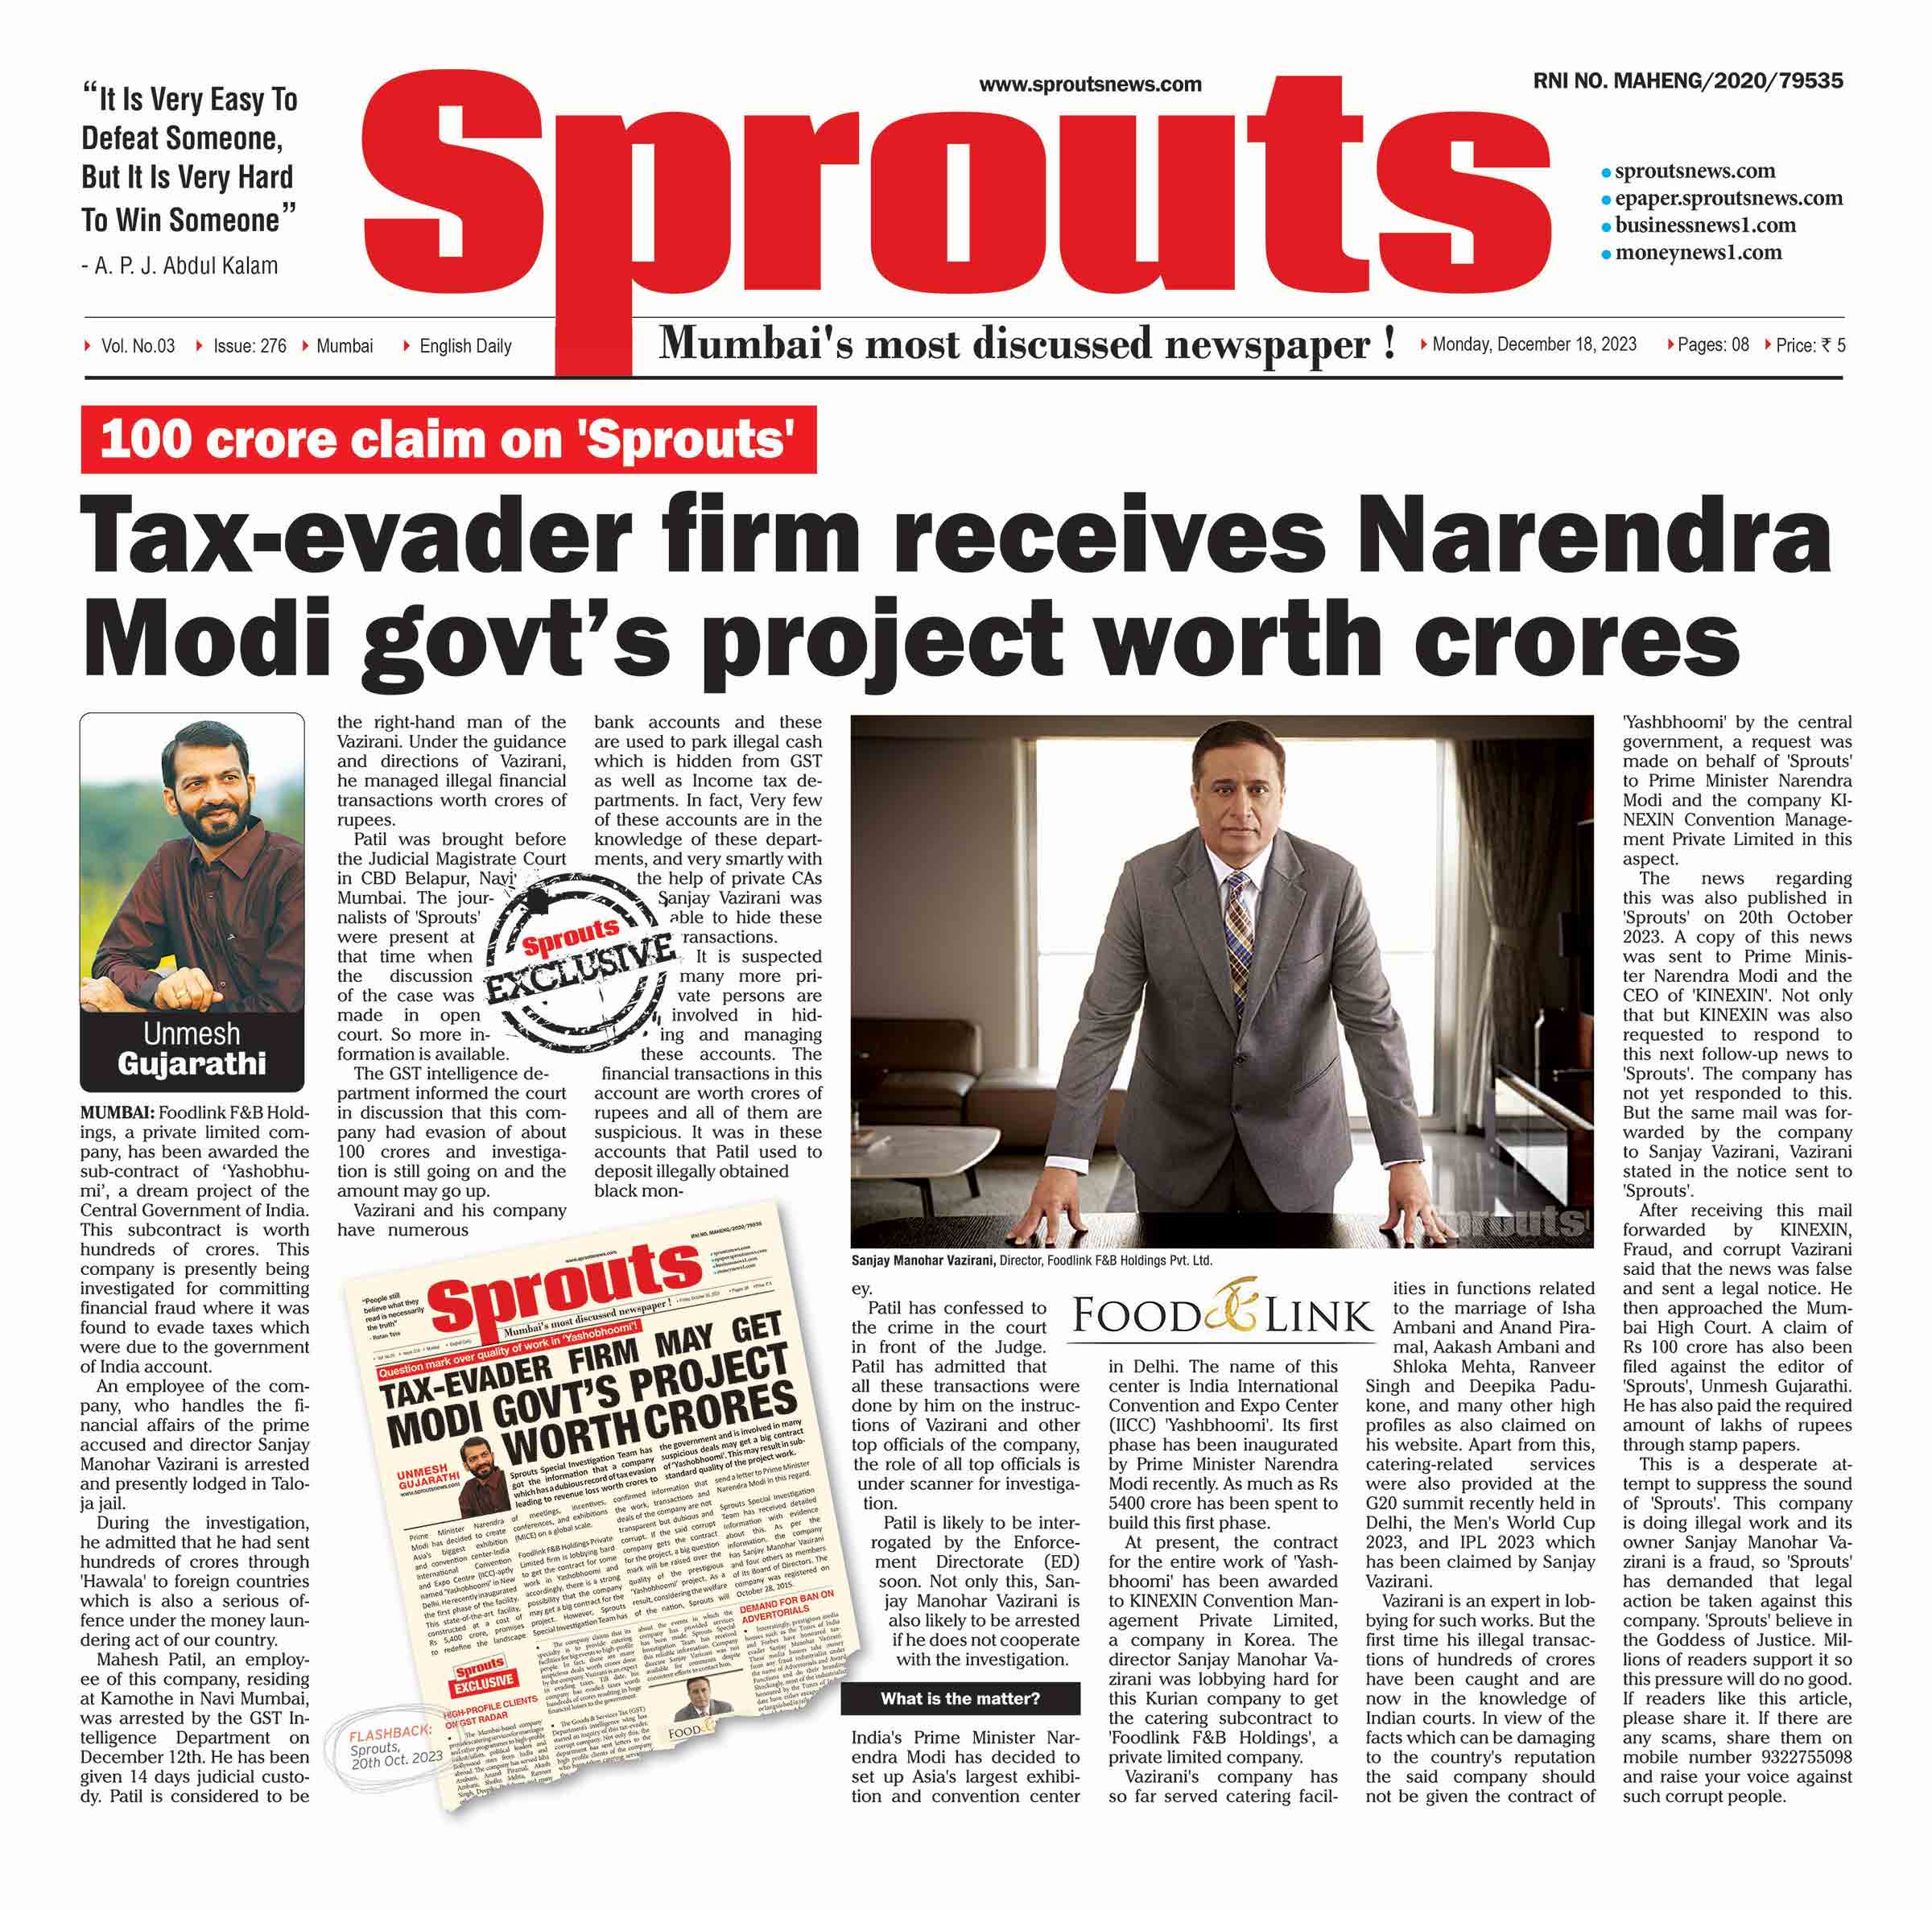 Tax-evader firm receives Narendra Modi govt’s project worth crores